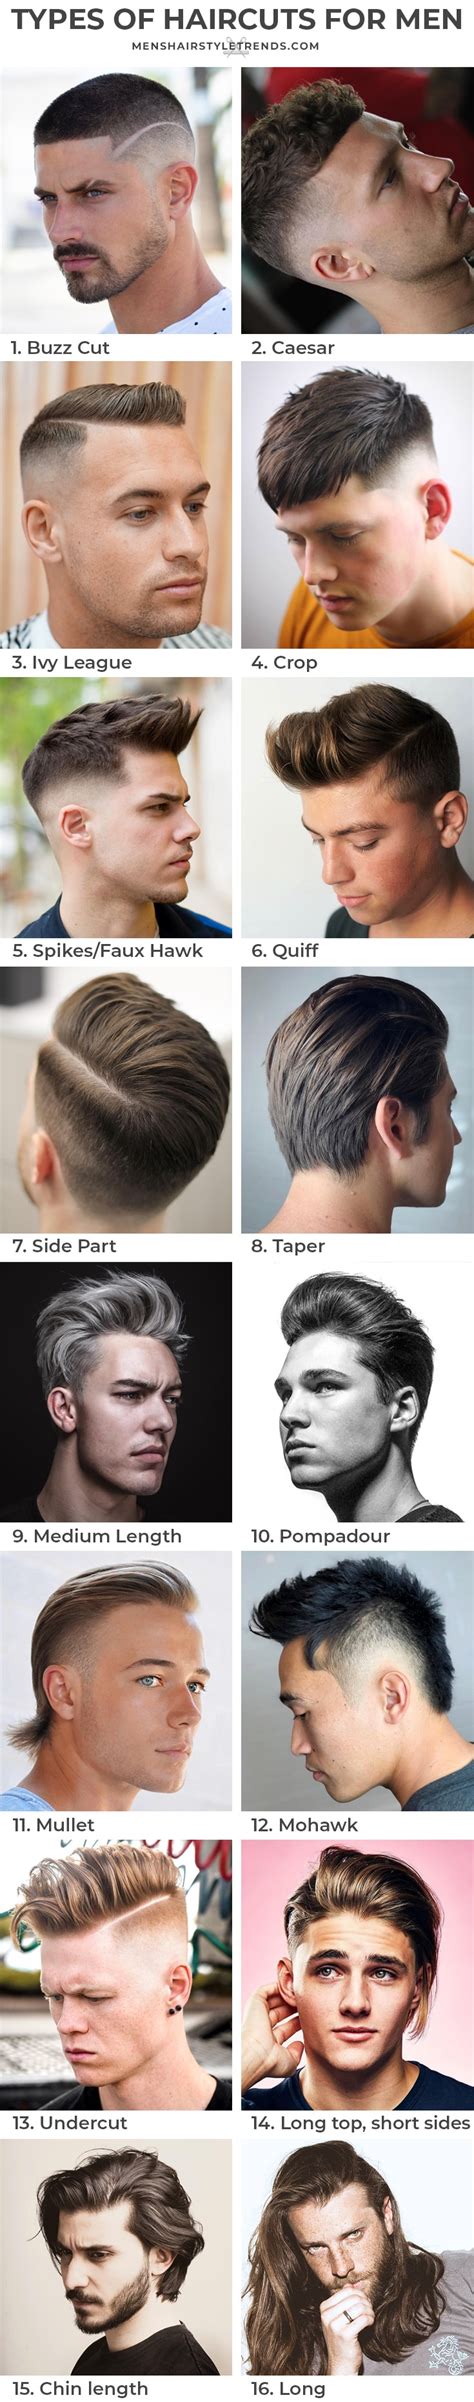 Whats Your Hairstylehaircut Like Men Sherdog Forums Ufc Mma